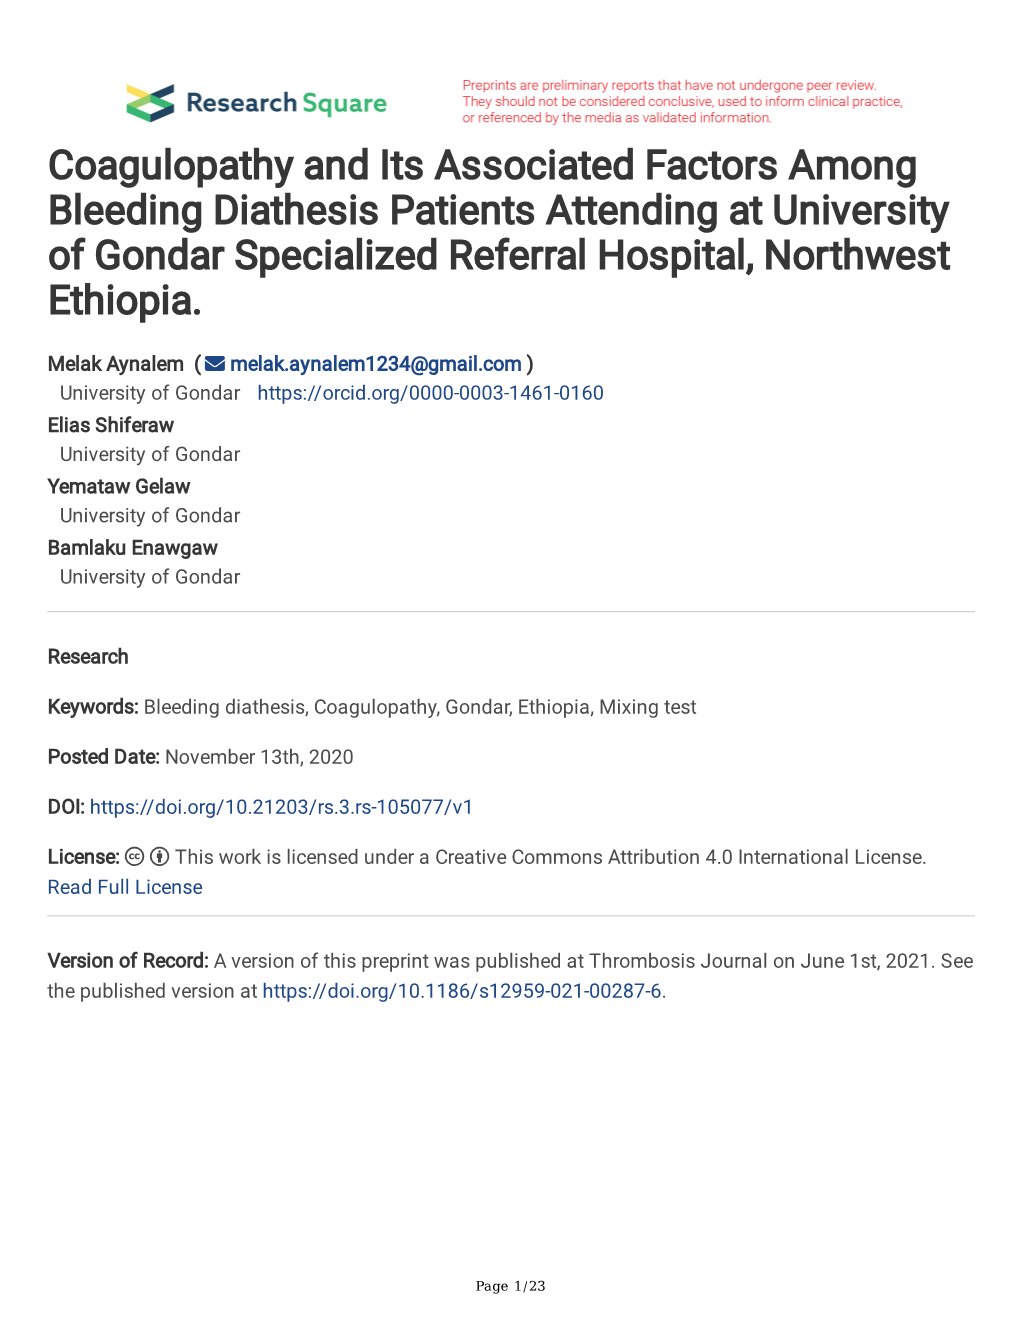 Coagulopathy and Its Associated Factors Among Bleeding Diathesis Patients Attending at University of Gondar Specialized Referral Hospital, Northwest Ethiopia